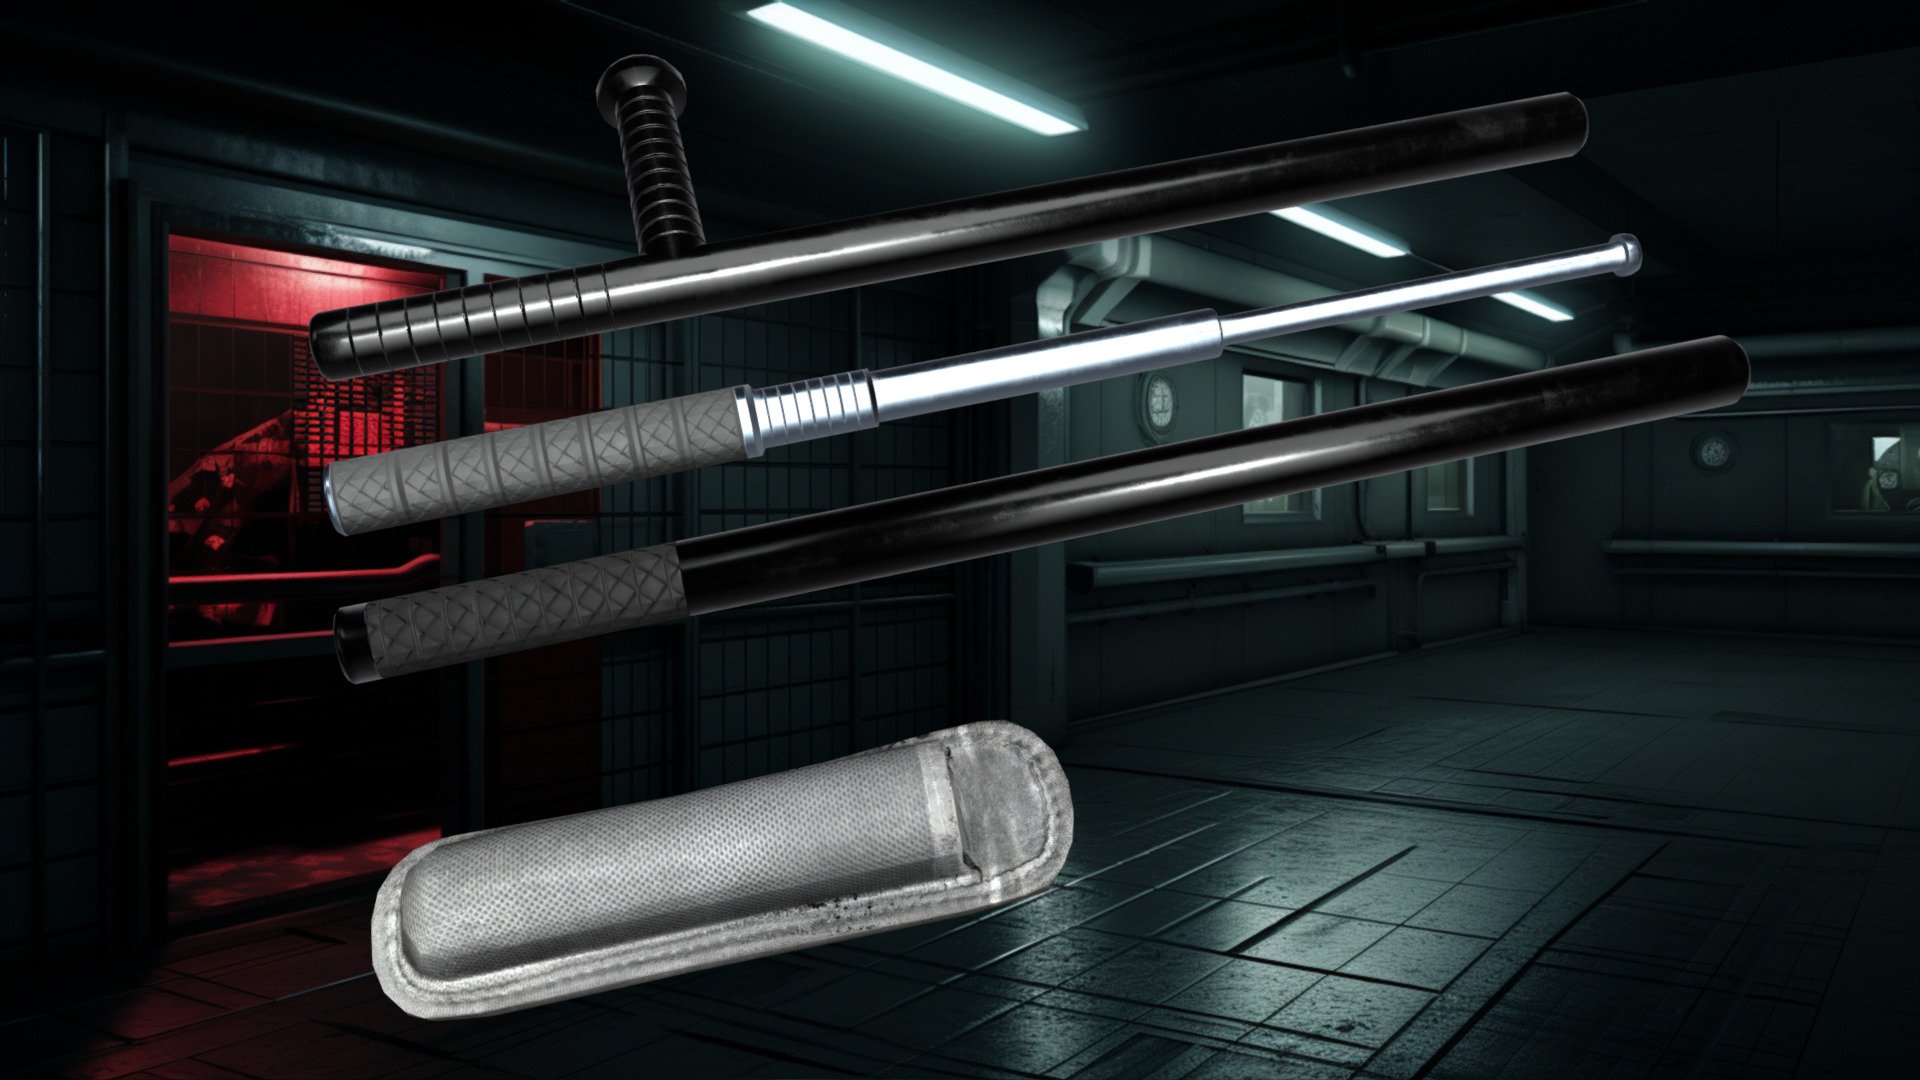 Discover EveBat Studios Animation and Game Development Projects here!: bit.ly/EveBatStudios 

Your Complete Self-Defense Solution!





Standard Tactical Baton: This standard baton offers precision and control. The textured grip ensures a secure hold, while the matte black finish adds a professional touch.




Riot Tactical Baton: Designed for crowd control, this baton features reinforced steel construction, a rubberized handle and a second handle that acts as a hand guard to protect the user.




Collapsing Baton: Compact and discreet, this stainless steel baton extends with a quick flick, making it ideal for close-quarters situations. Its secure locking mechanism prevents accidental deployment.



Compact 3D-Scanned Holster: Made from durable polymer, the holster offers a custom fit for the collapsing baton. It's versatile with belt loop and MOLLE attachments, ensuring quick, secure access.

The Tactical Baton Trio: Versatile, Durable, and Ready for Any Situation. Your Safety – Our Priority! - Tactical Baton Trio Pack - Buy Royalty Free 3D model by Eve Bat Studios (@EveBatStudios) 3d model